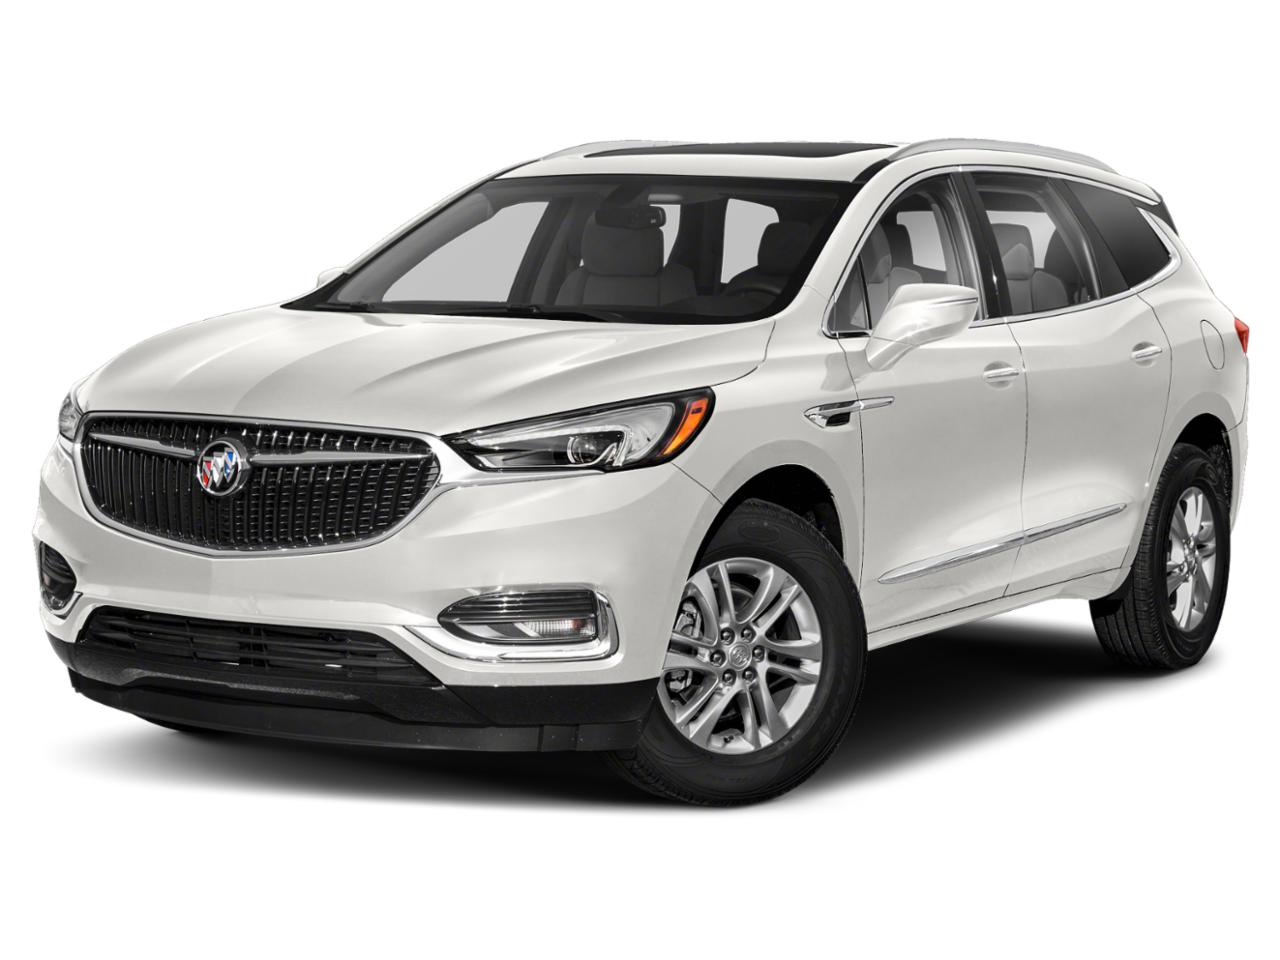 new 2021 Summit White Buick Enclave For Sale in Akron - VanDevere Buick